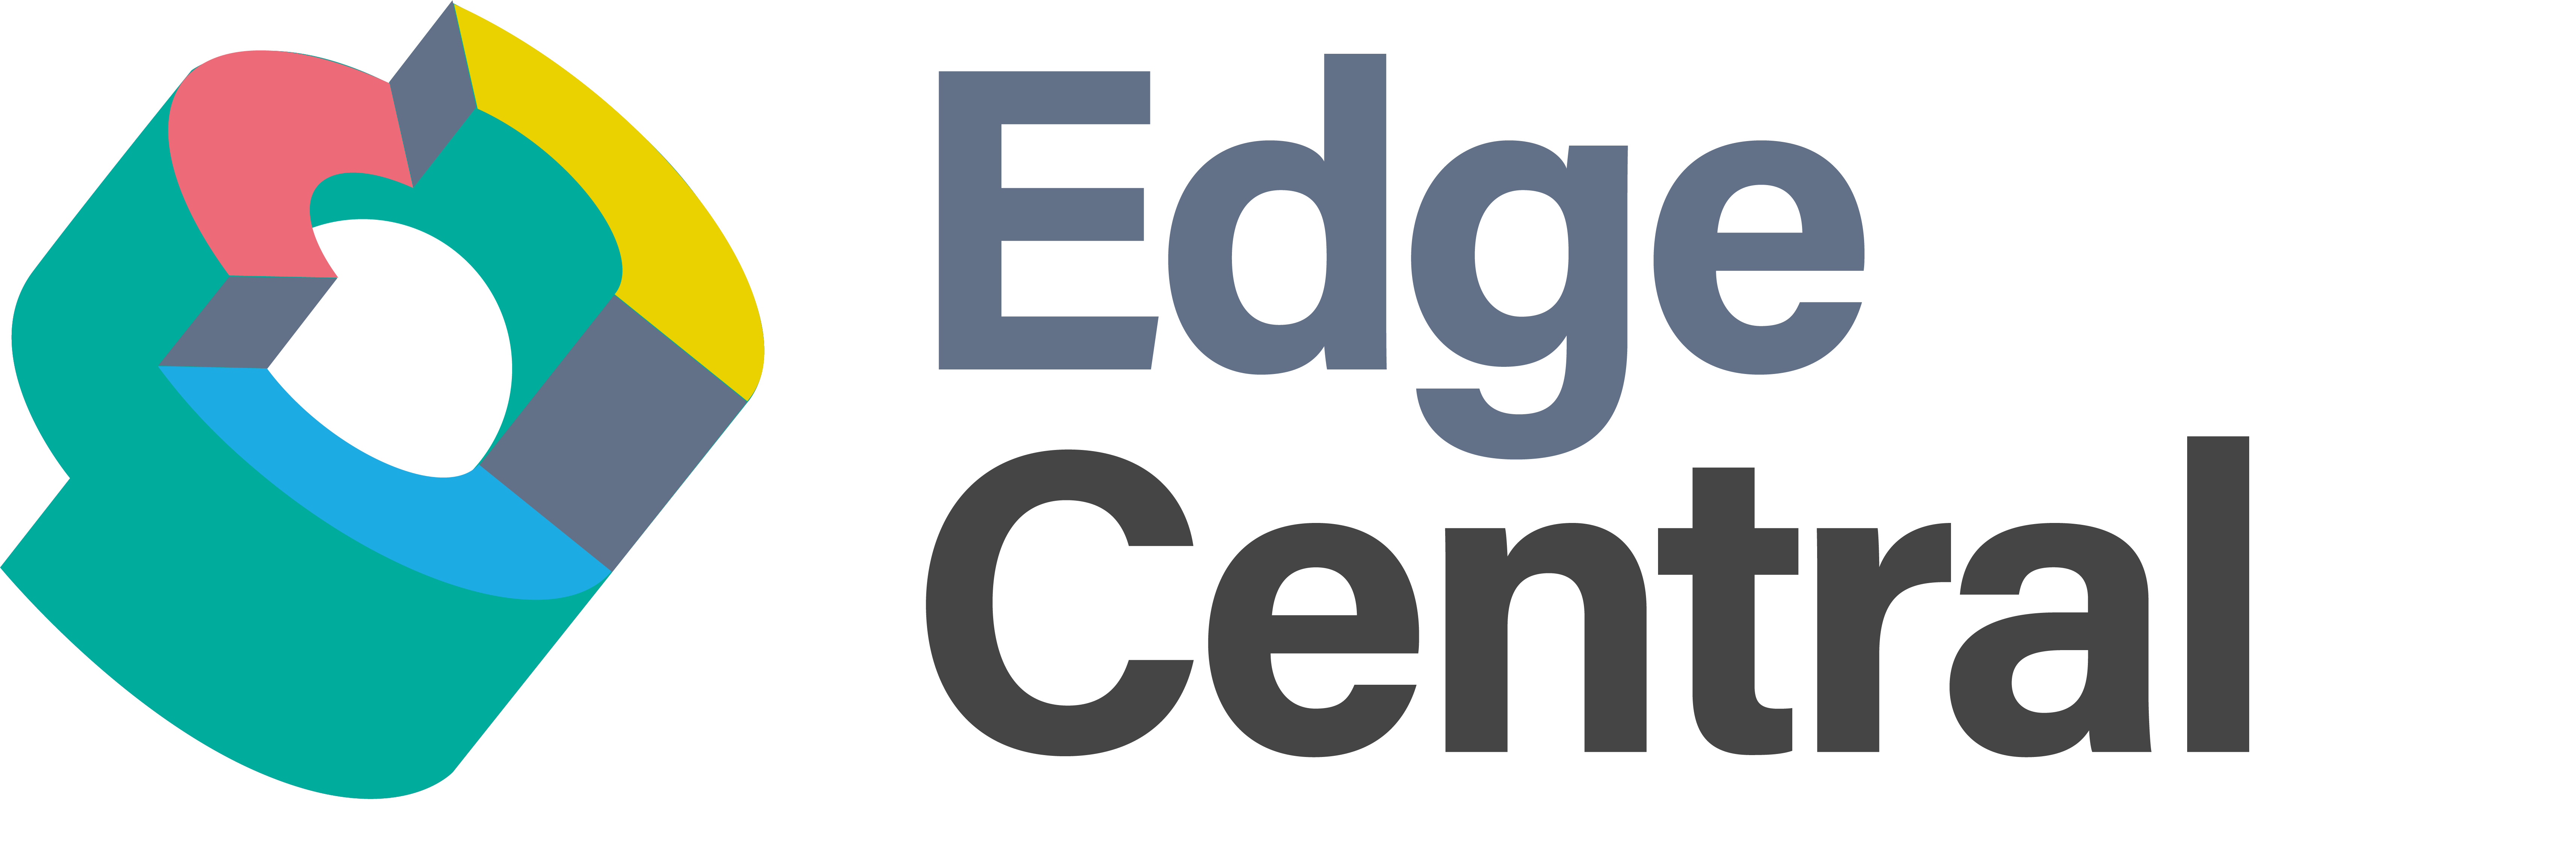 Edge Xpert logo | IOTech Systems, Smart Retail Software Solutions